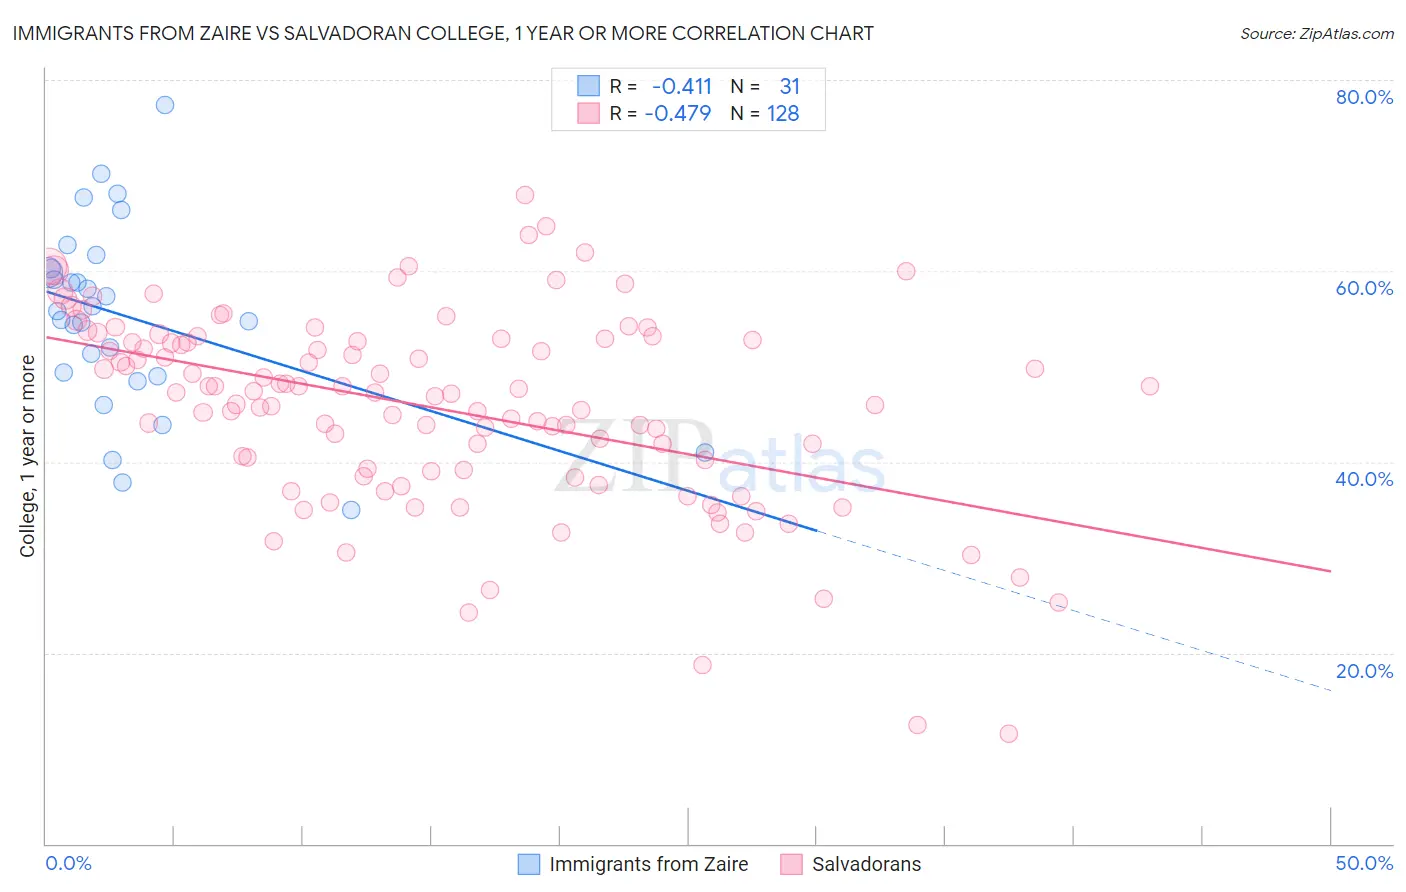 Immigrants from Zaire vs Salvadoran College, 1 year or more